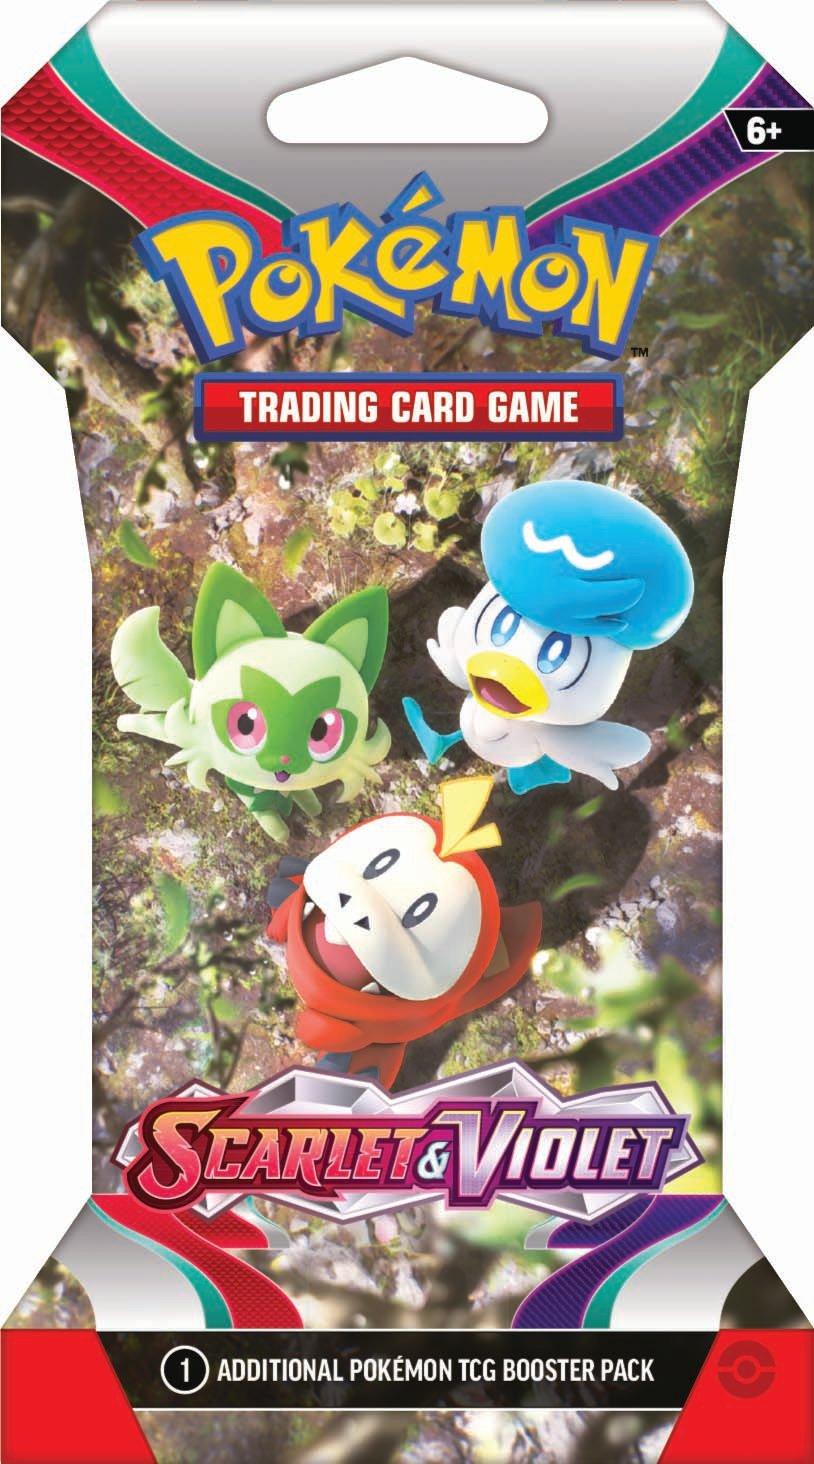 https://media.gamestop.com/i/gamestop/20002522_ALT04/Pokemon-Trading-Card-Game-Scarlet-and-Violet-Sleeved-Booster-Pack-Styles-May-Vary?$pdp$